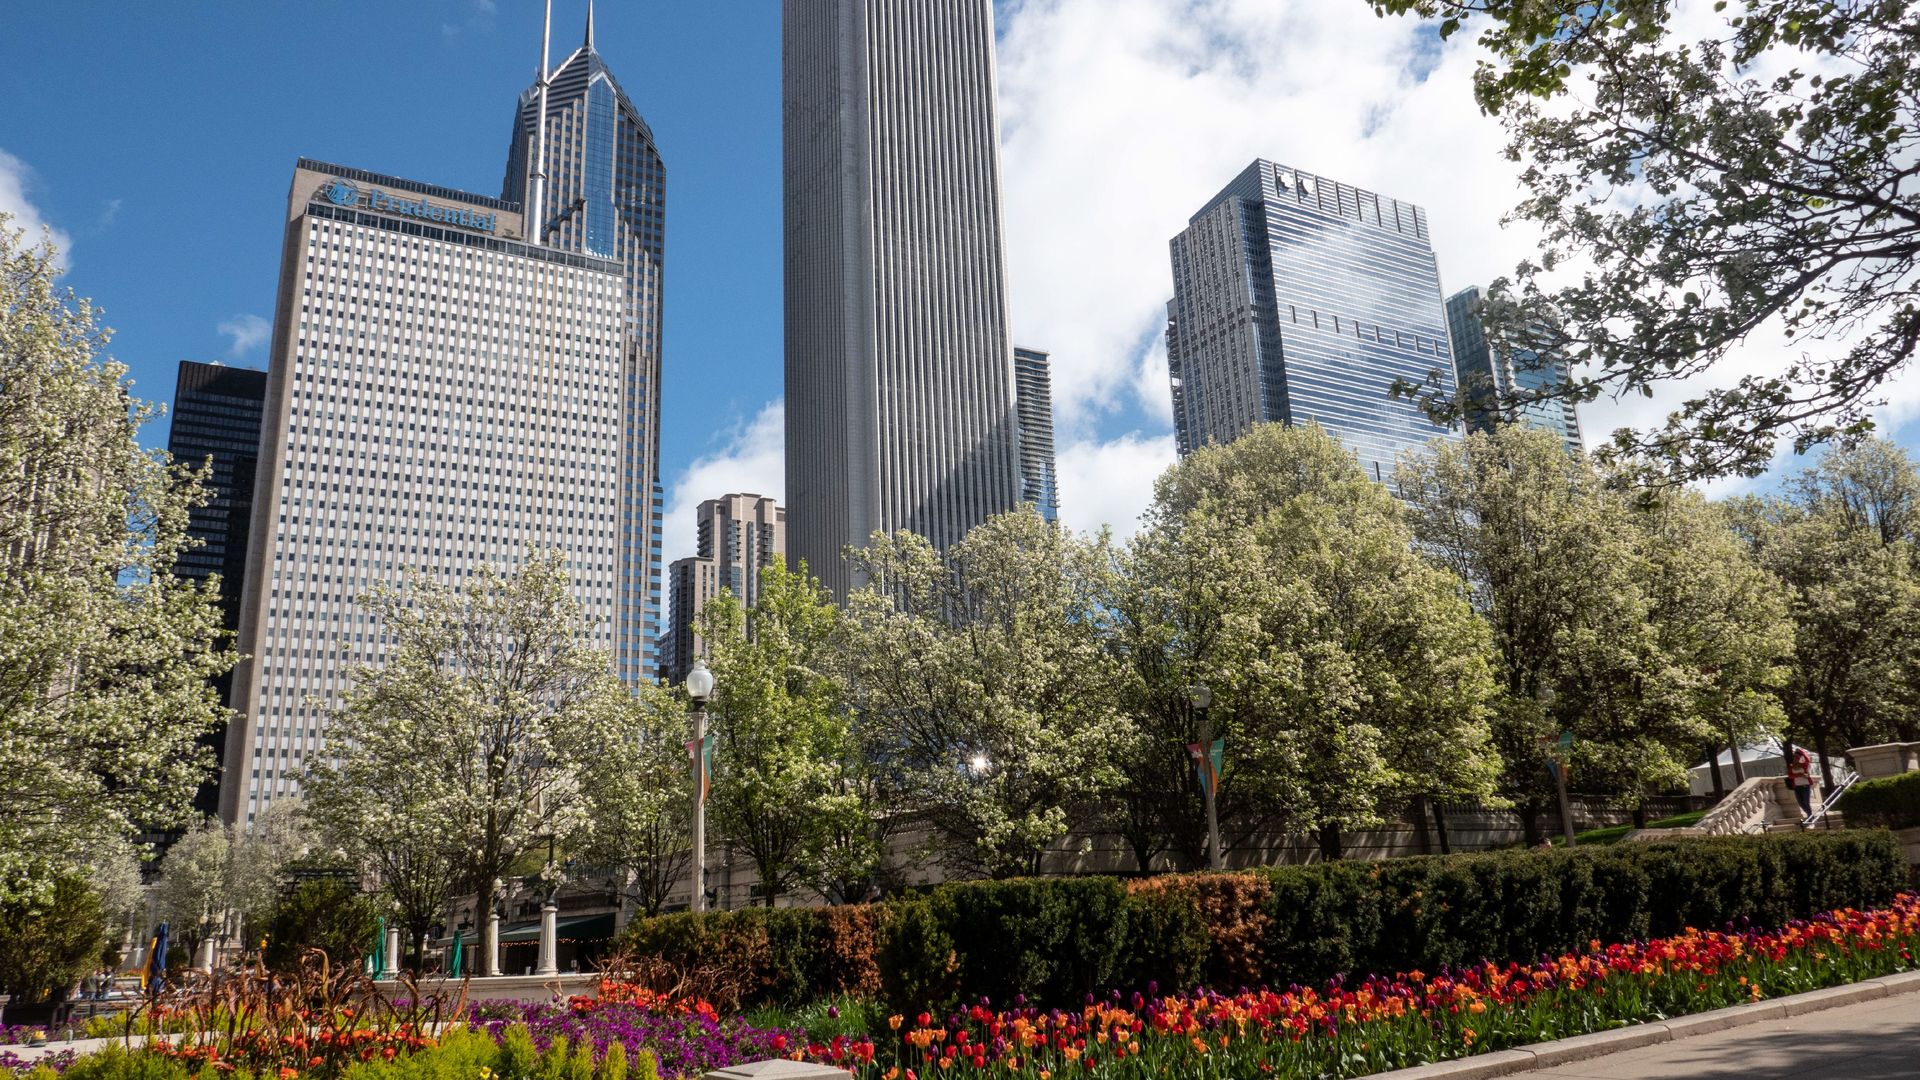 Photo of flowers blooming in front of big skyscrapers. 